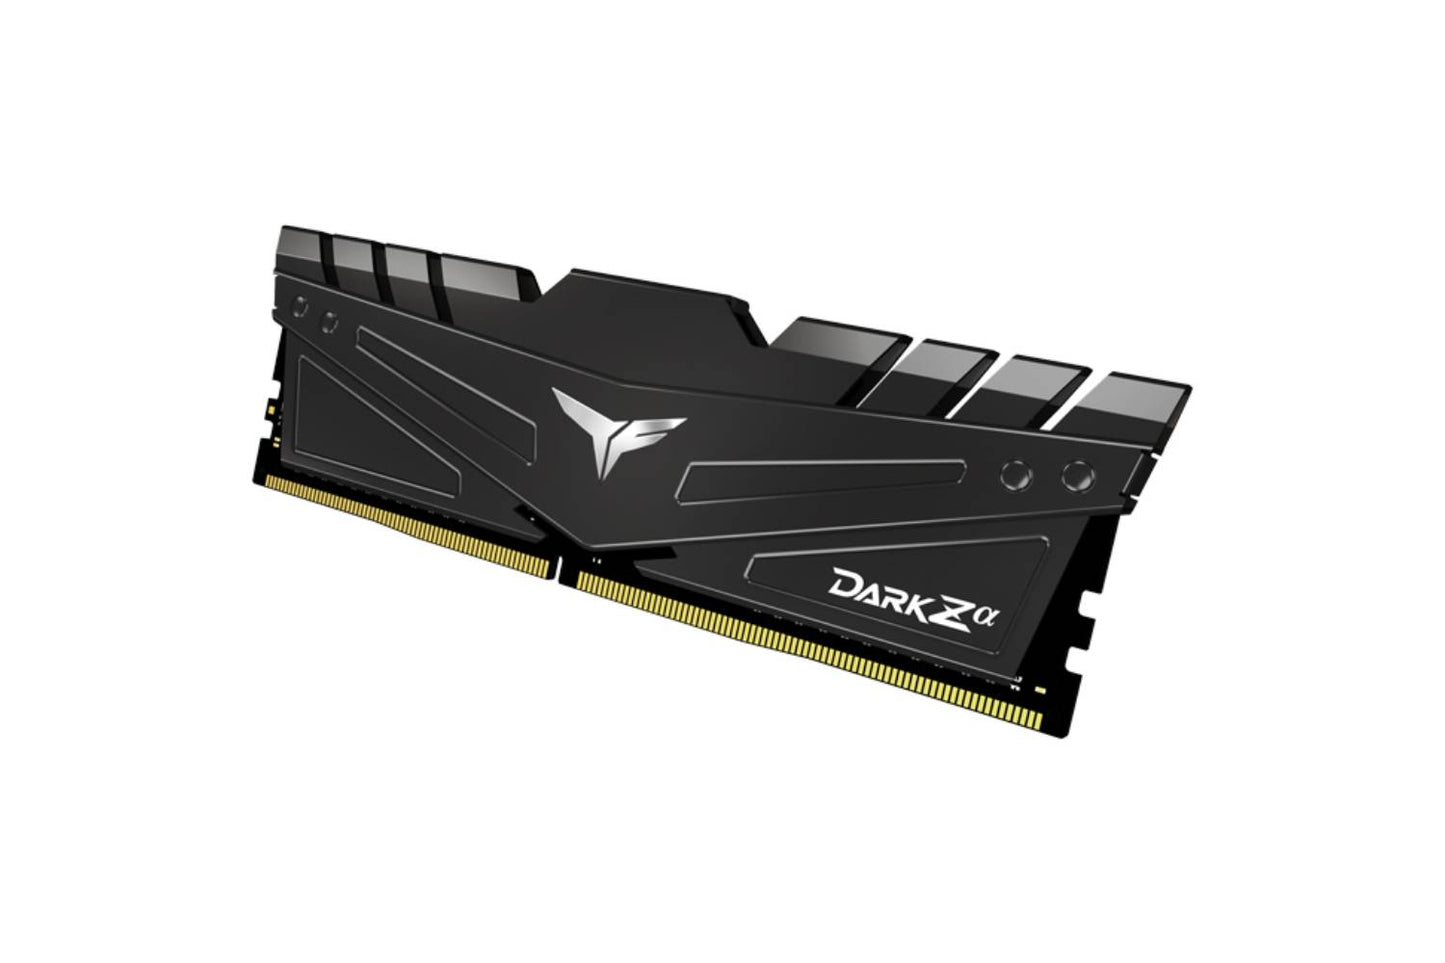 T-force DARK Zα DDR4 GAMING MEMORY (FOR AMD) (16GB x 2) 32GB Gaming Memory